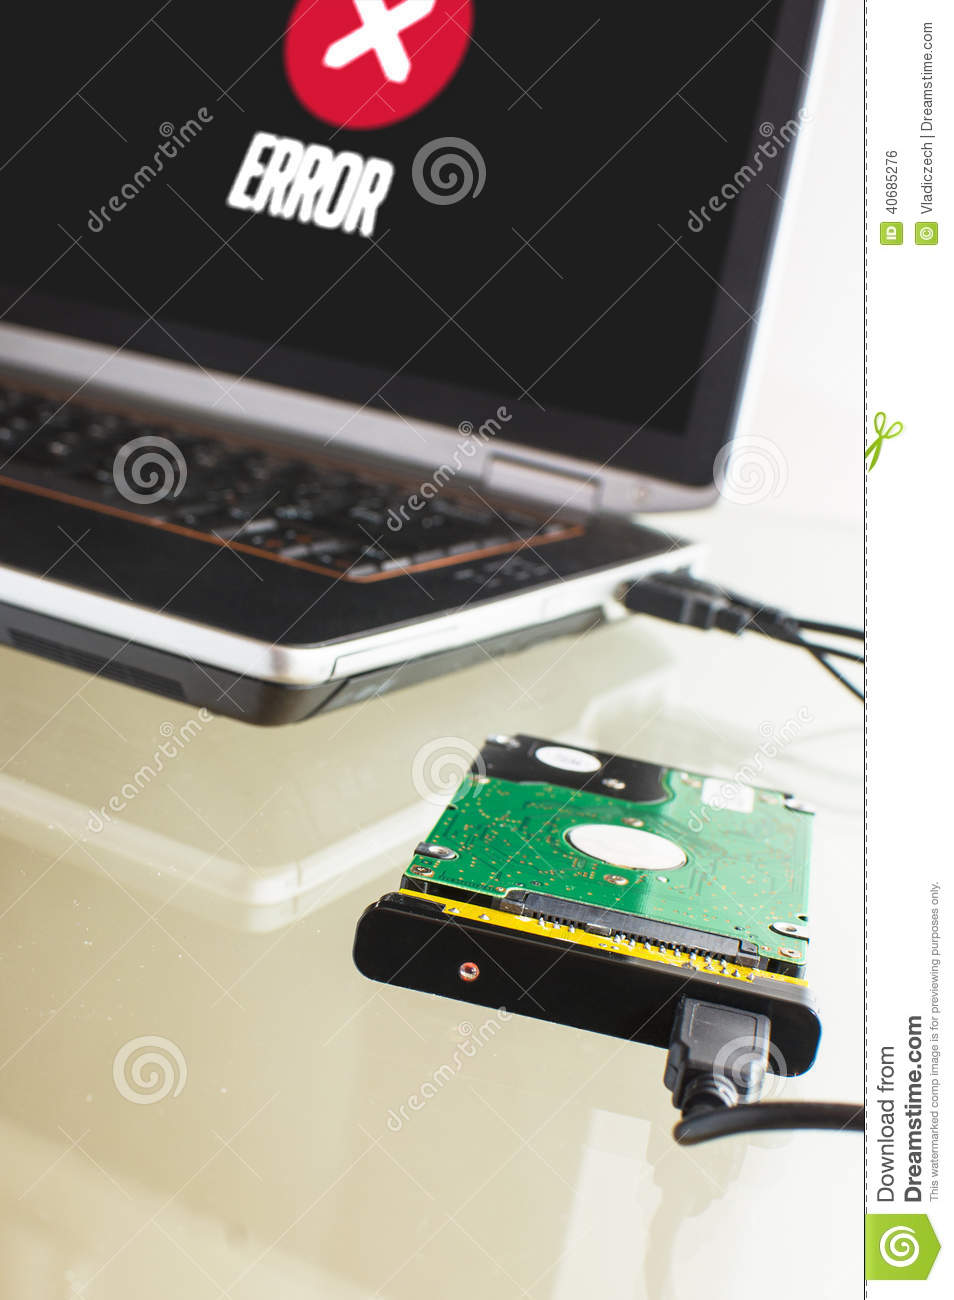 Failed Hdd Data Rescue Stock Photo   Image  40685276